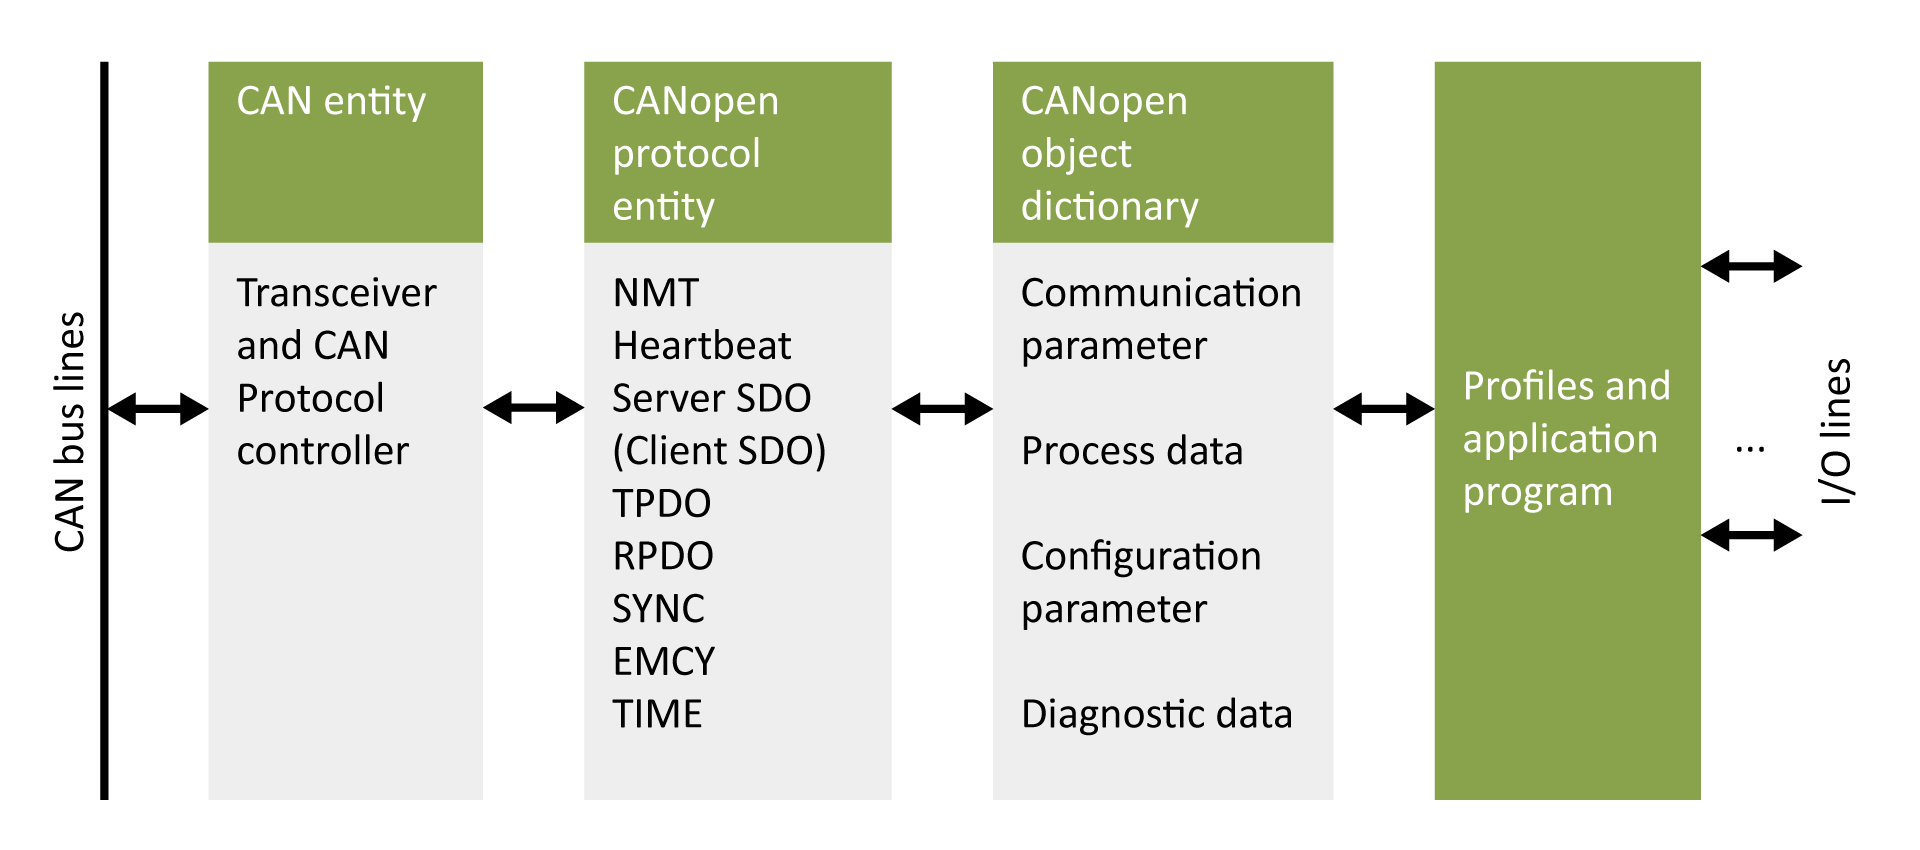 https://www.canopensolutions.com/img/The-CANopen-device-model.png